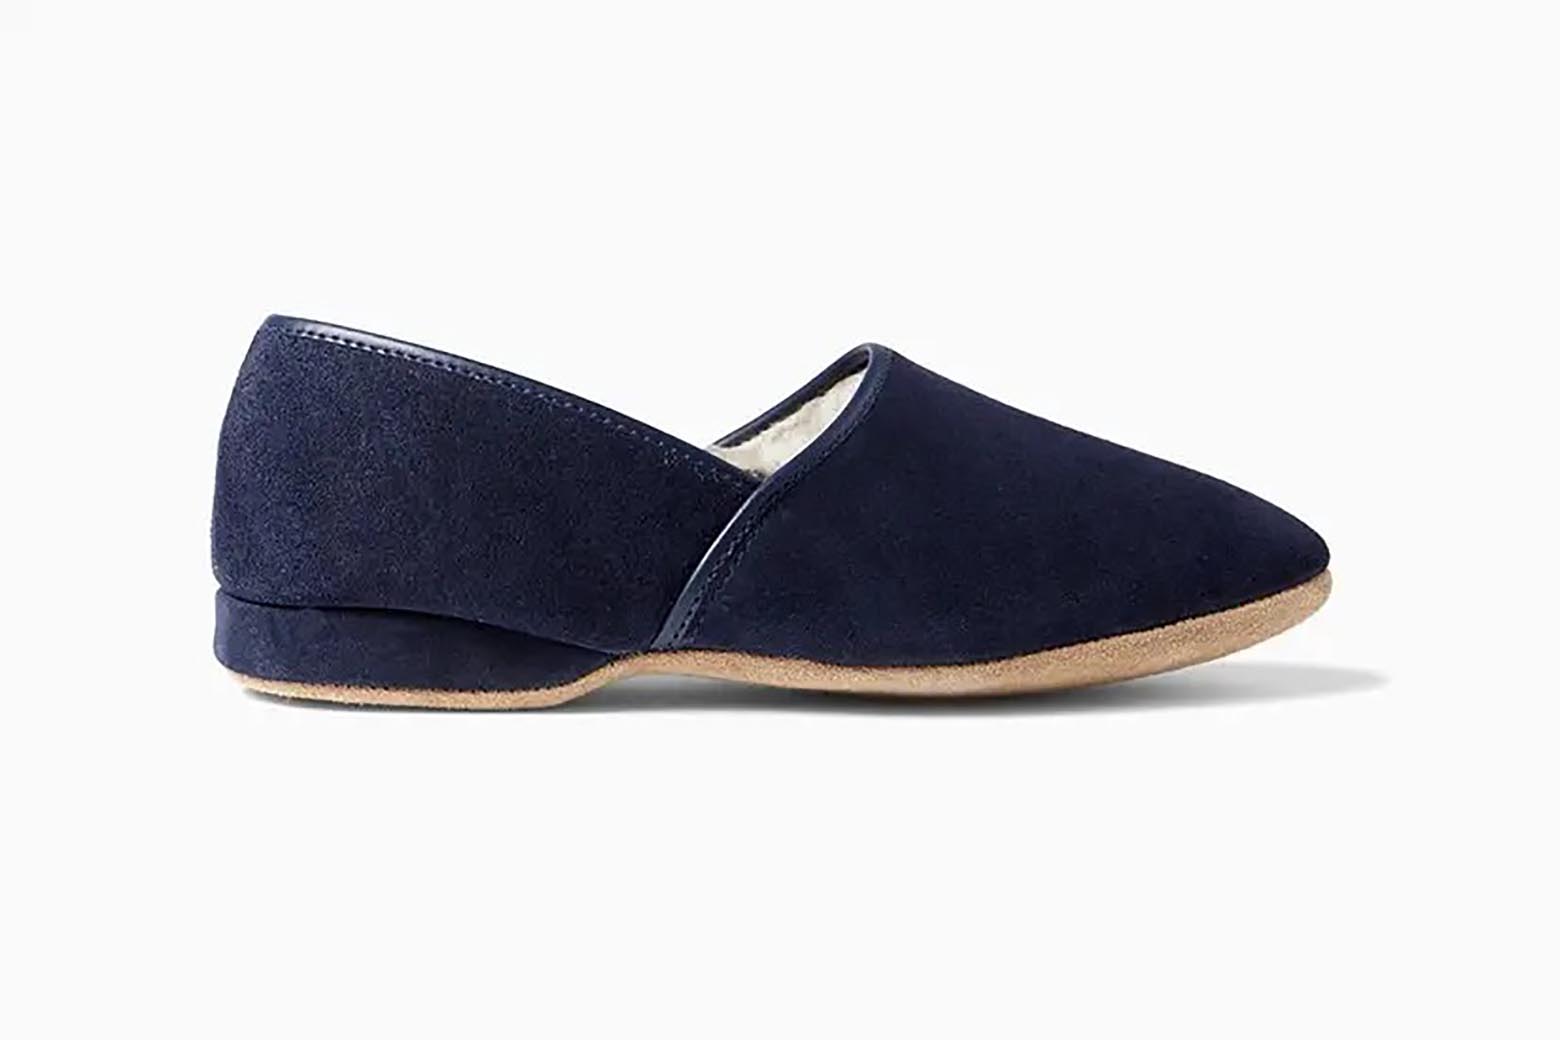 17 Best Men’s Slippers: Comfortable, Cosy & Even Chic (Guide)